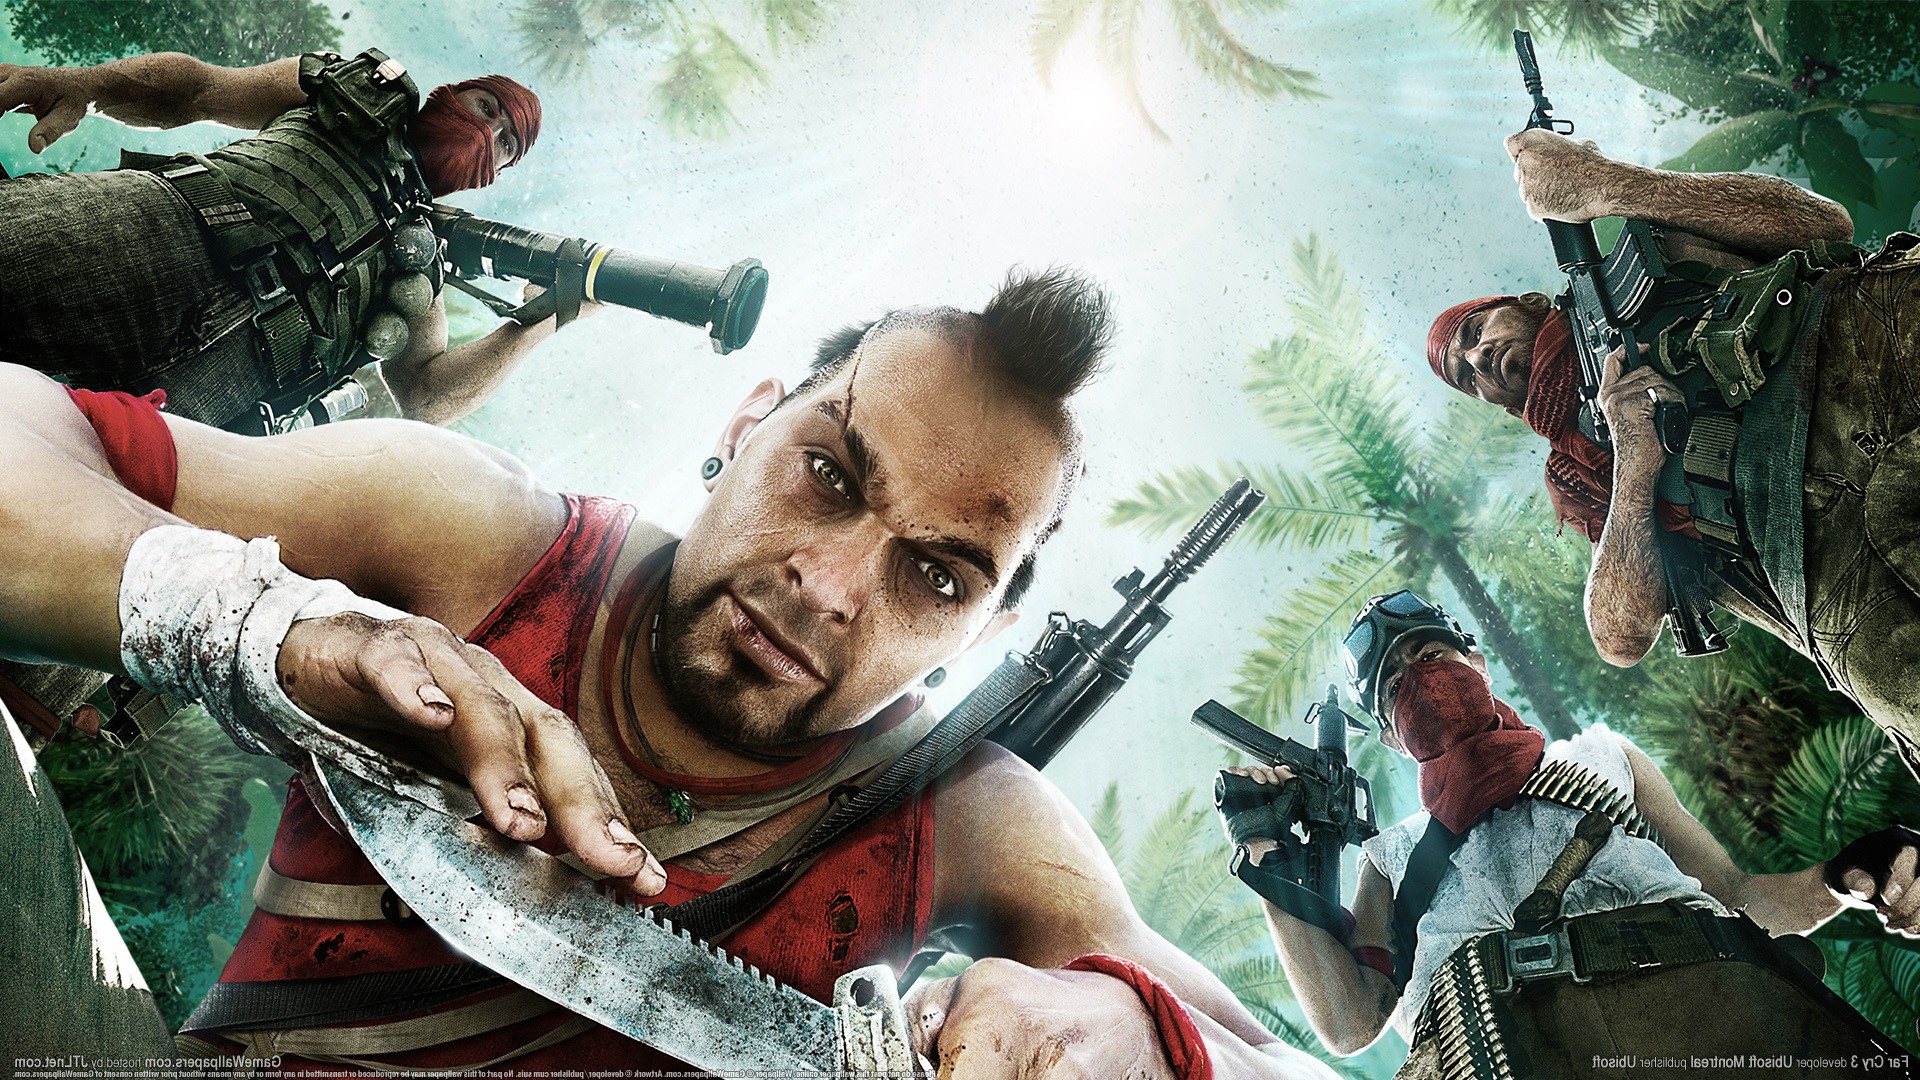 far cry 6 vaas download free